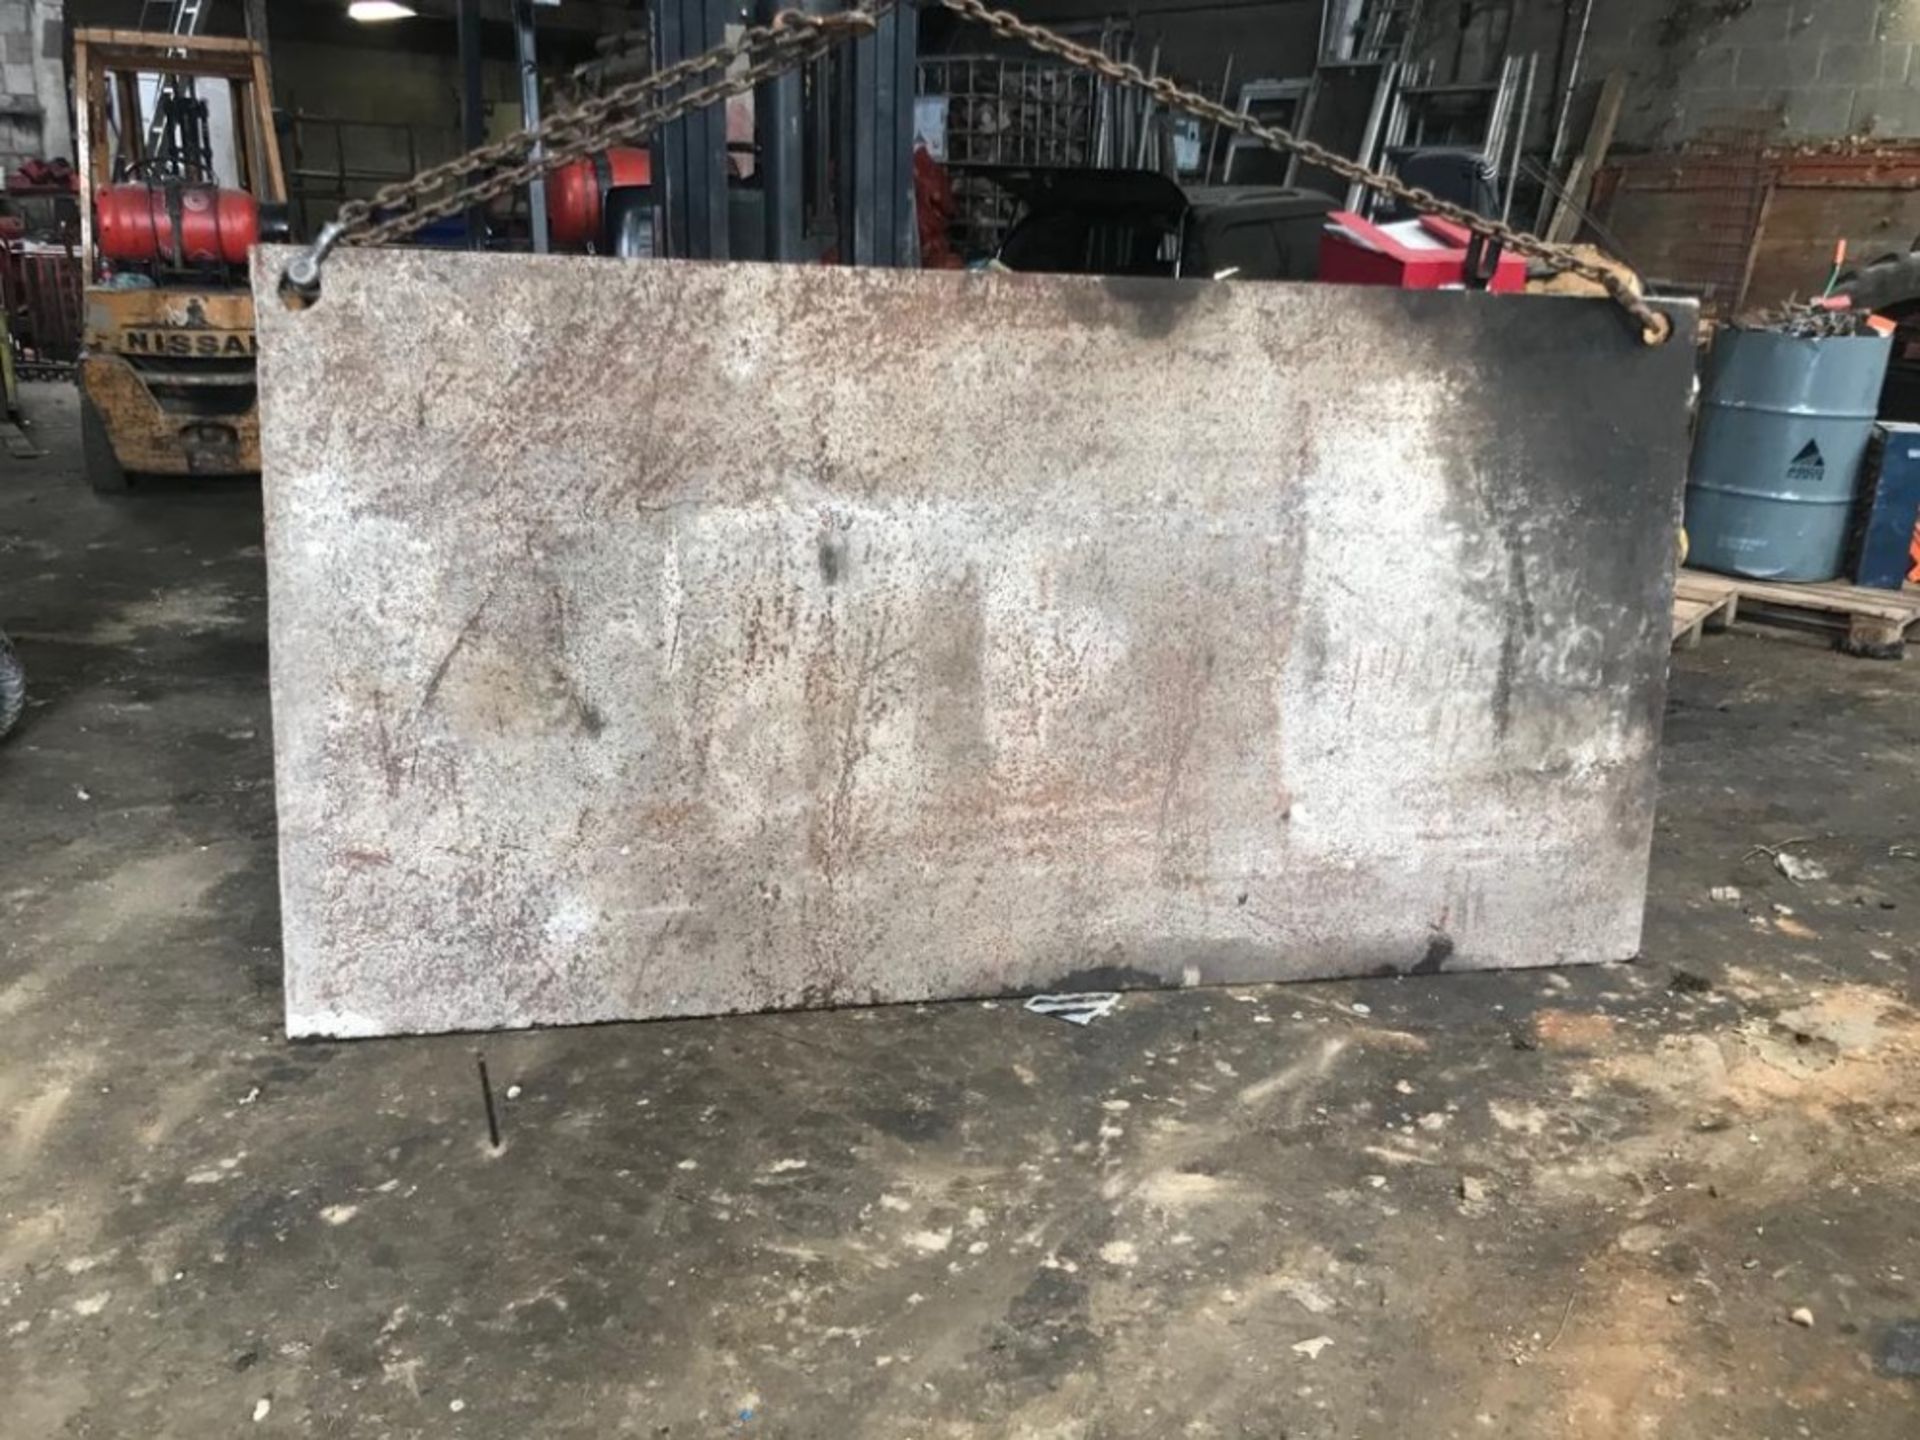 2 X STEEL ROAD PLATES, 1 IS 8FT X 2FT @20MM THICK APPROX, 1 IS 3FT X 3TF X 12MM THICK APPROX. LOT